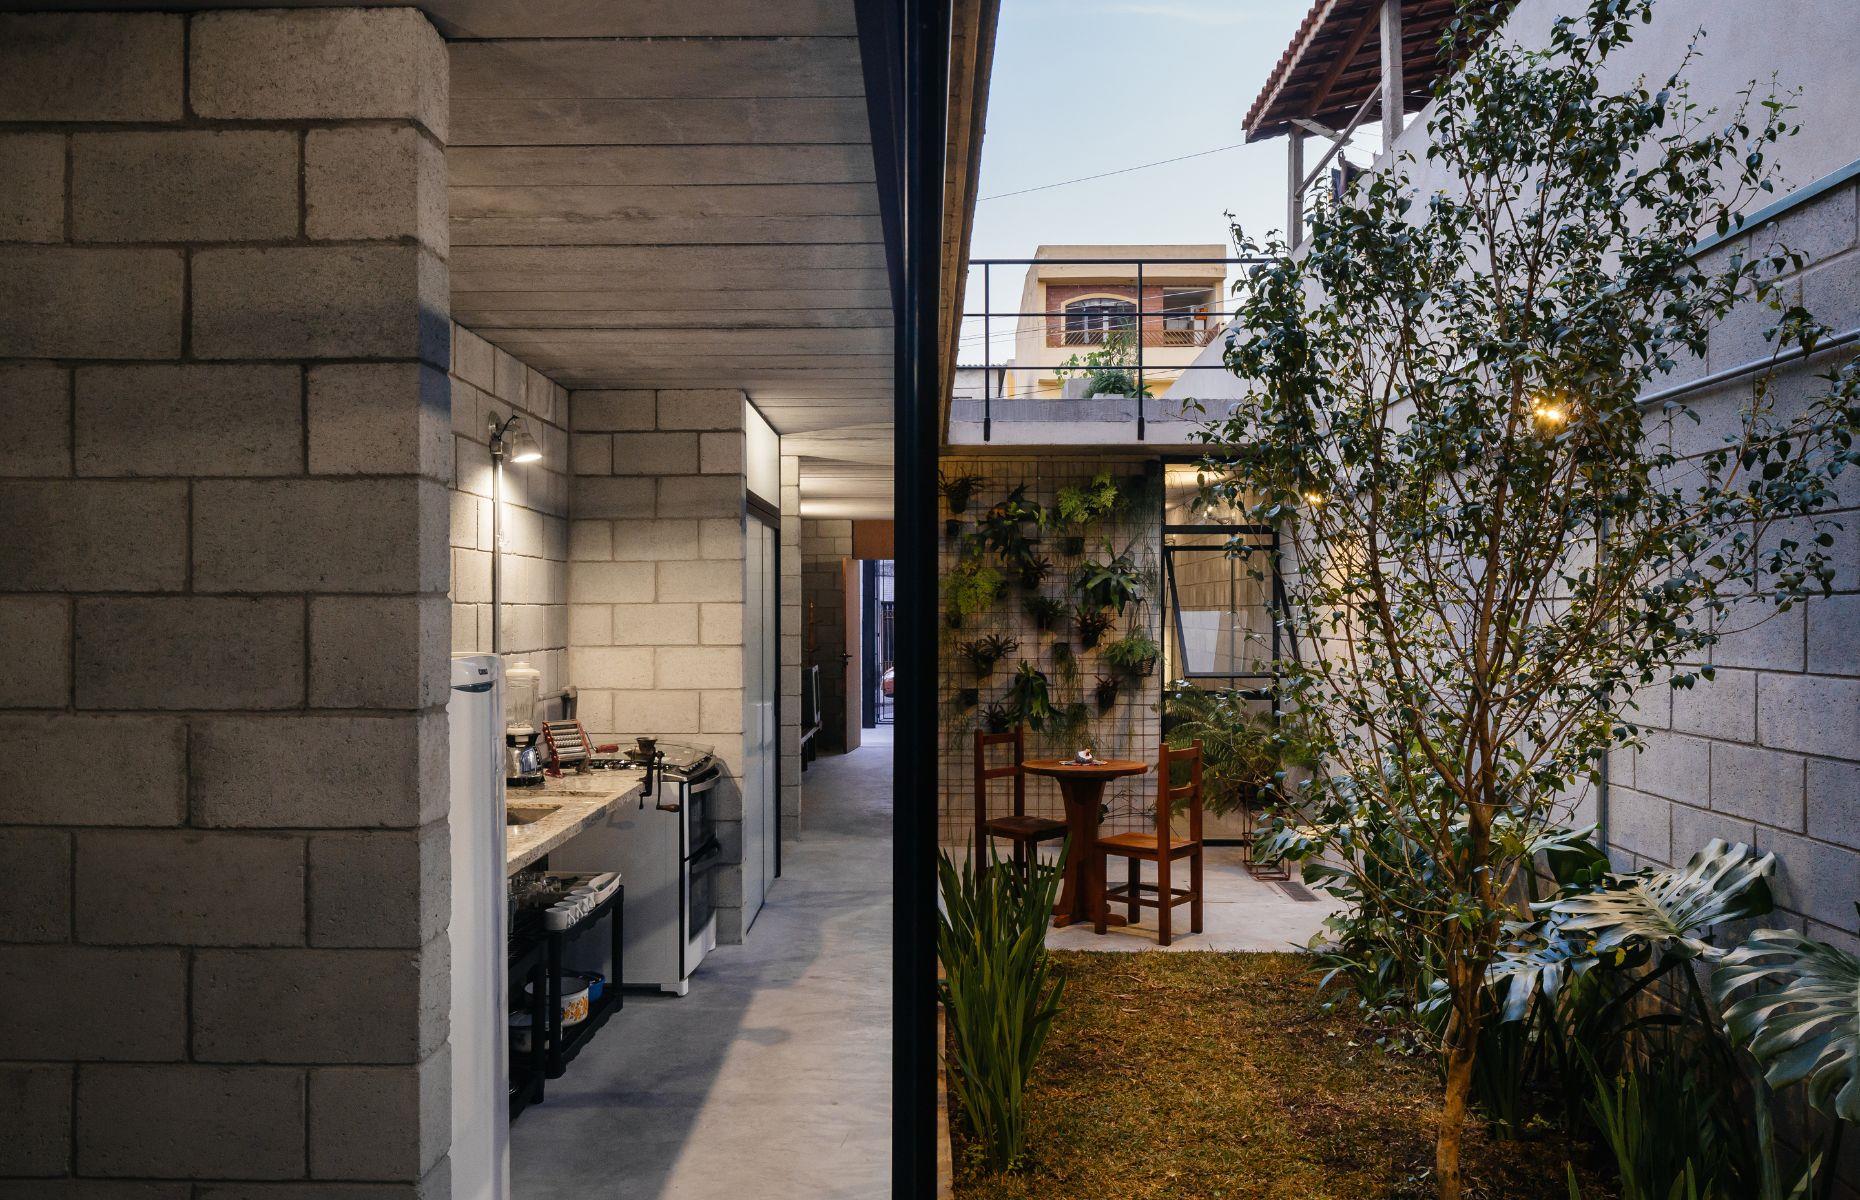 Inspiring concrete houses from around the world 